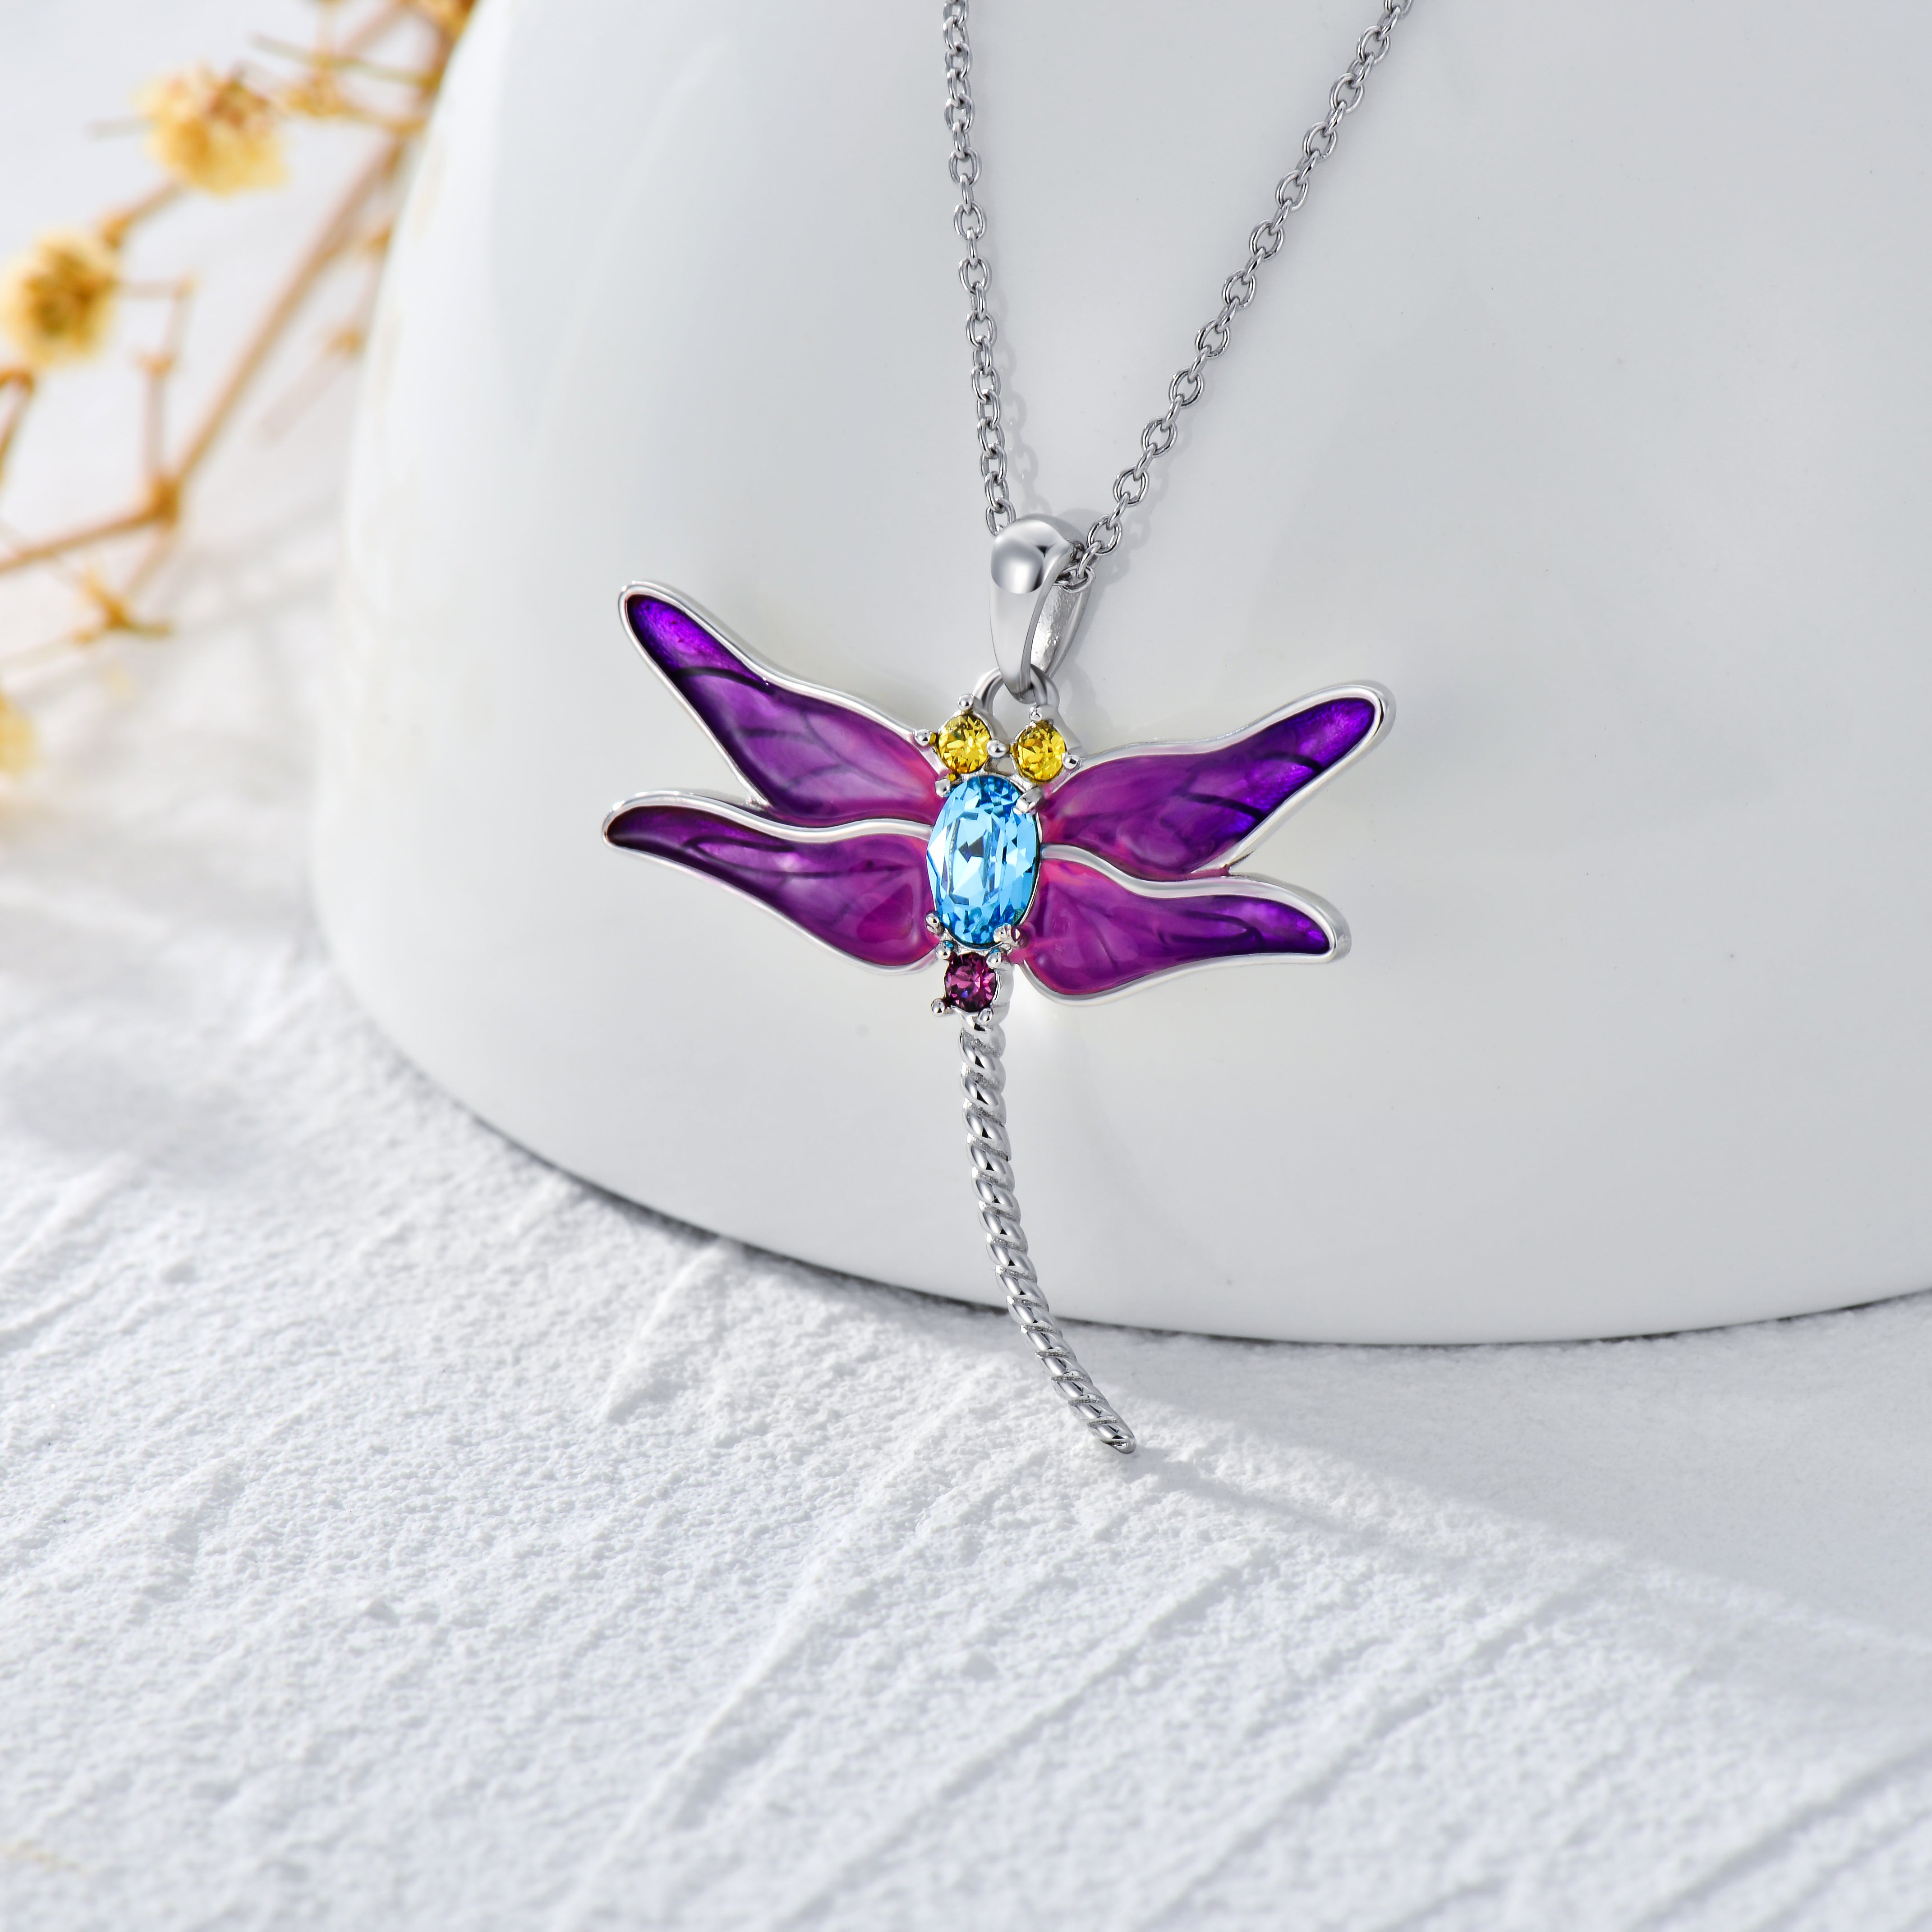 Crystal Stone 925 Sterling Silver Dragonfly Necklace